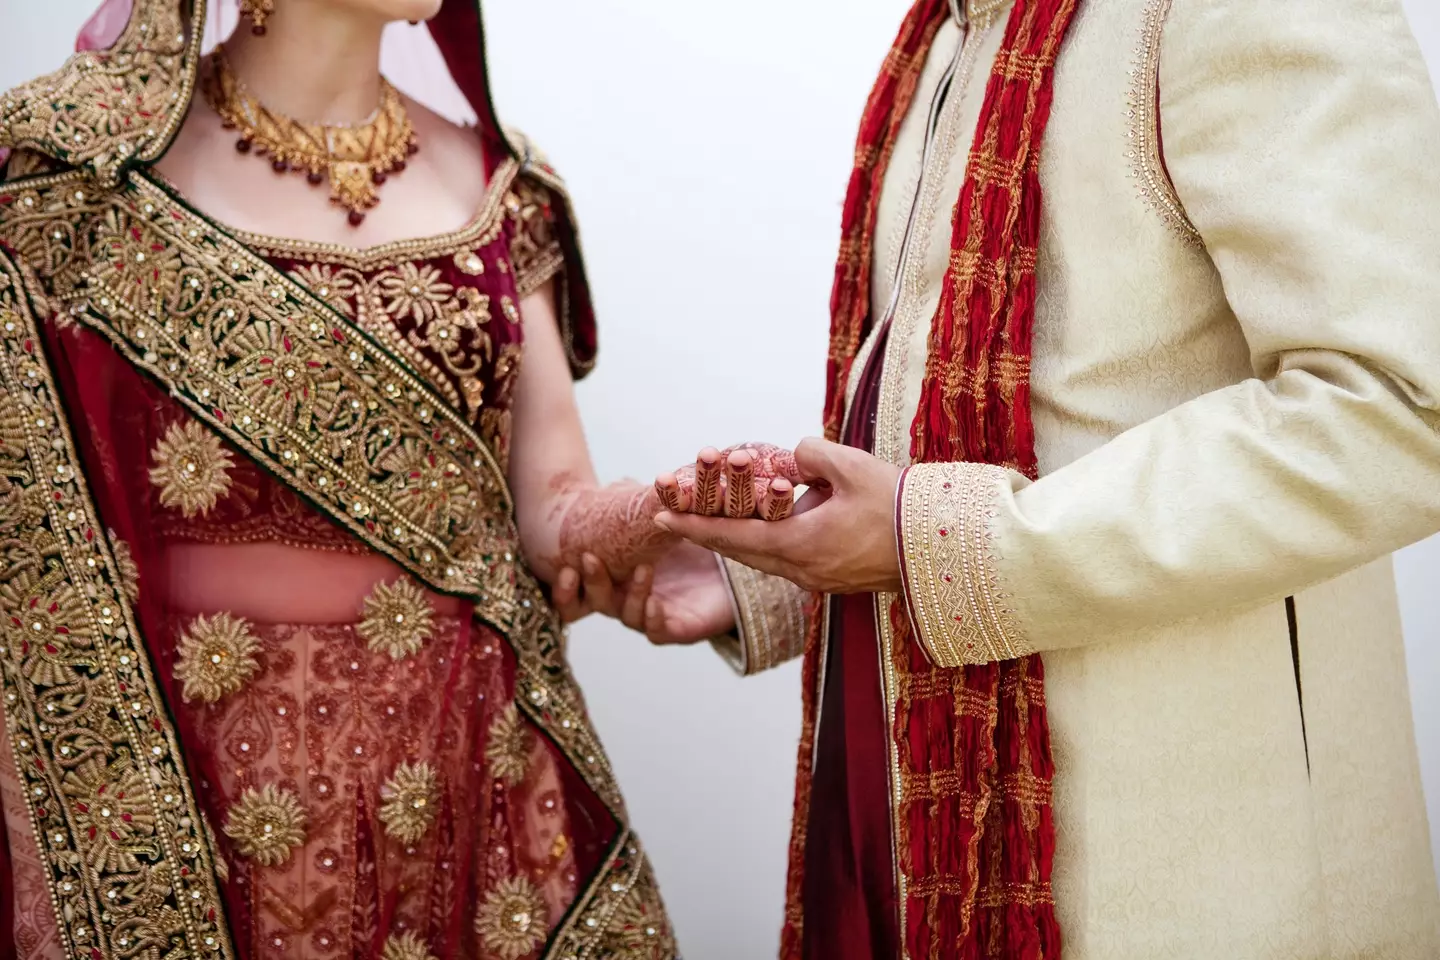 Bride and groom in traditional Indian wedding clothing.